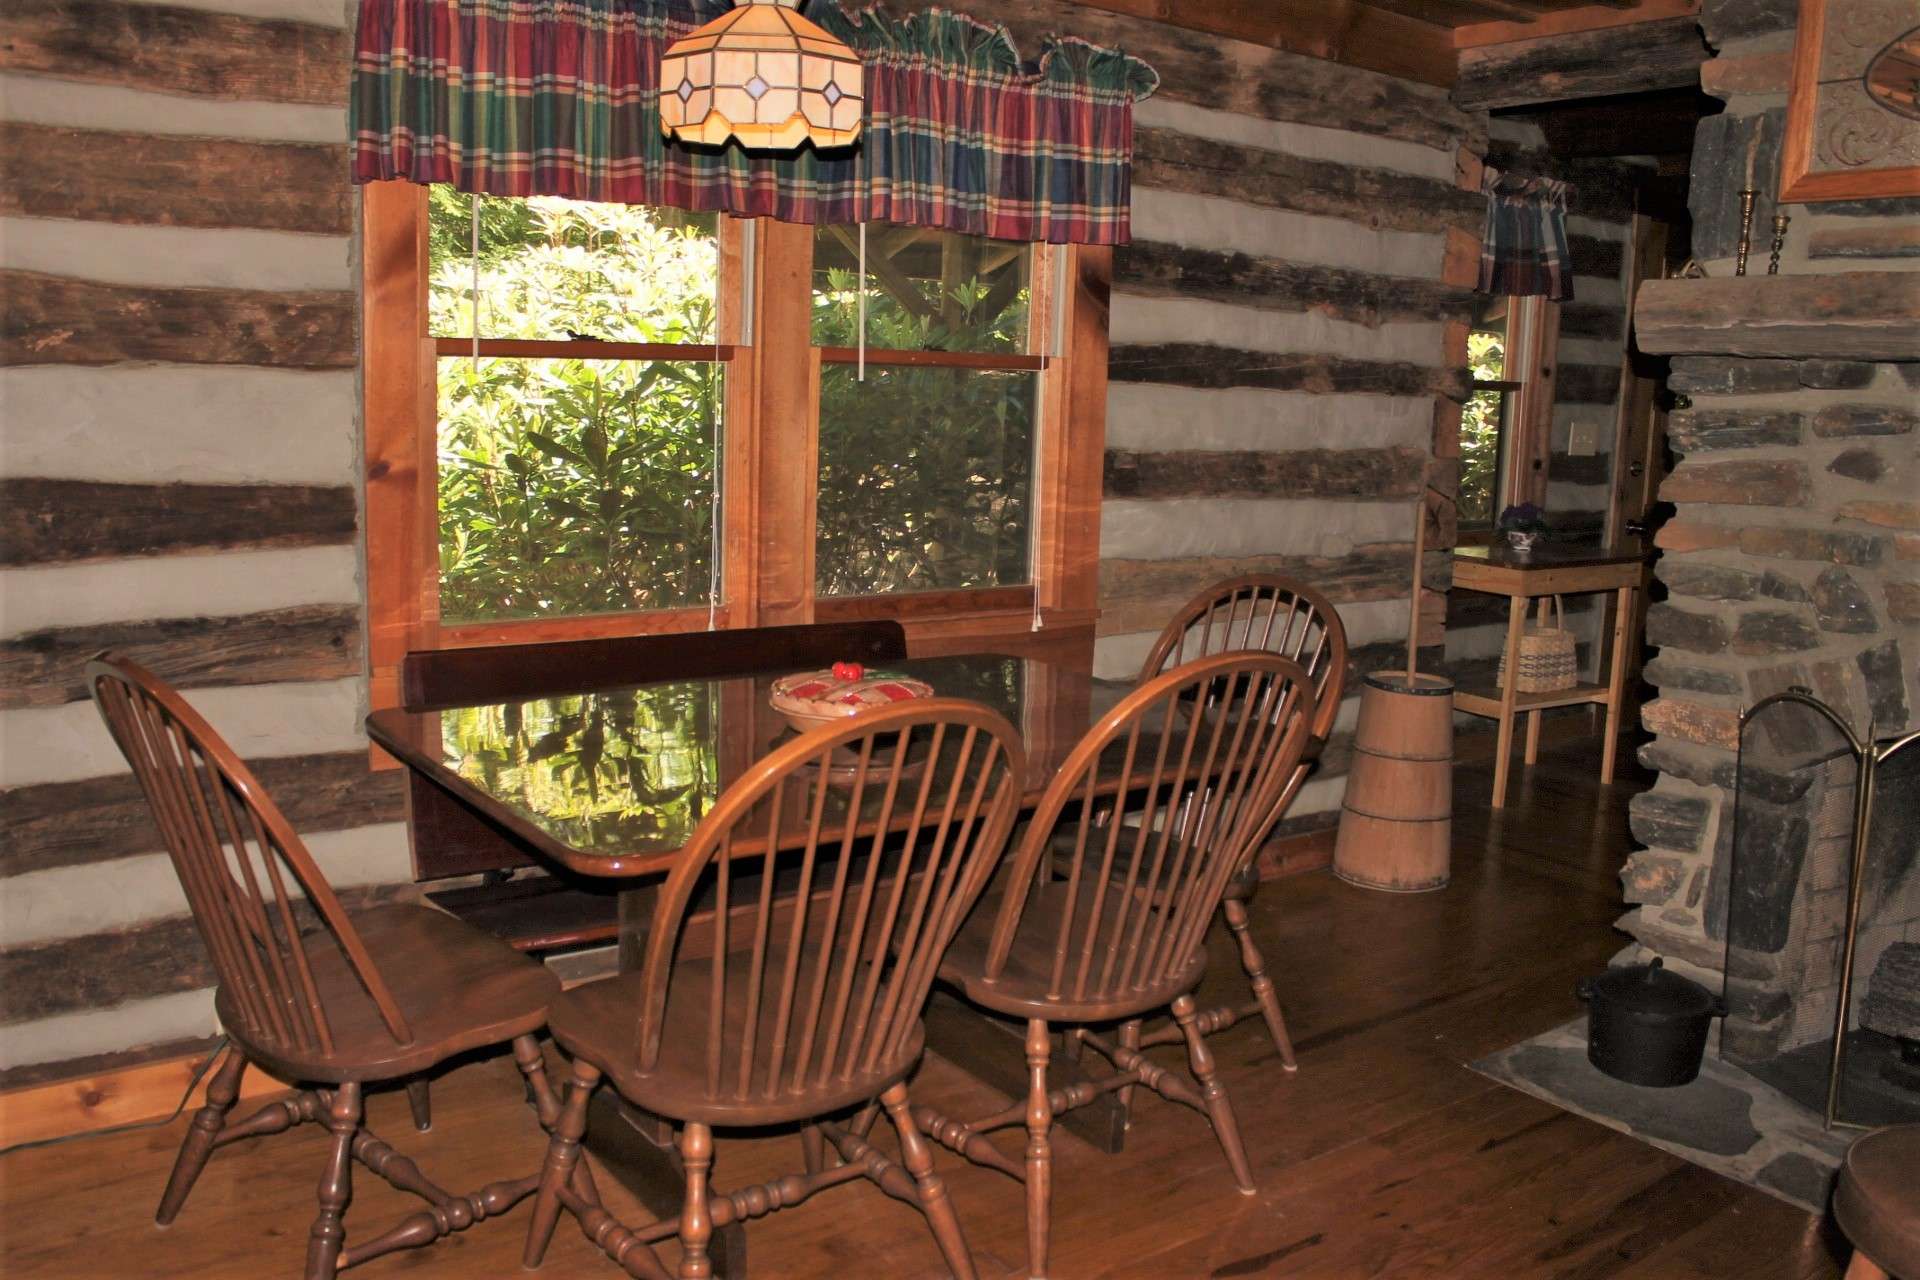 The dining area offers ample space to have a large family feast with views of the lovely wooded setting.